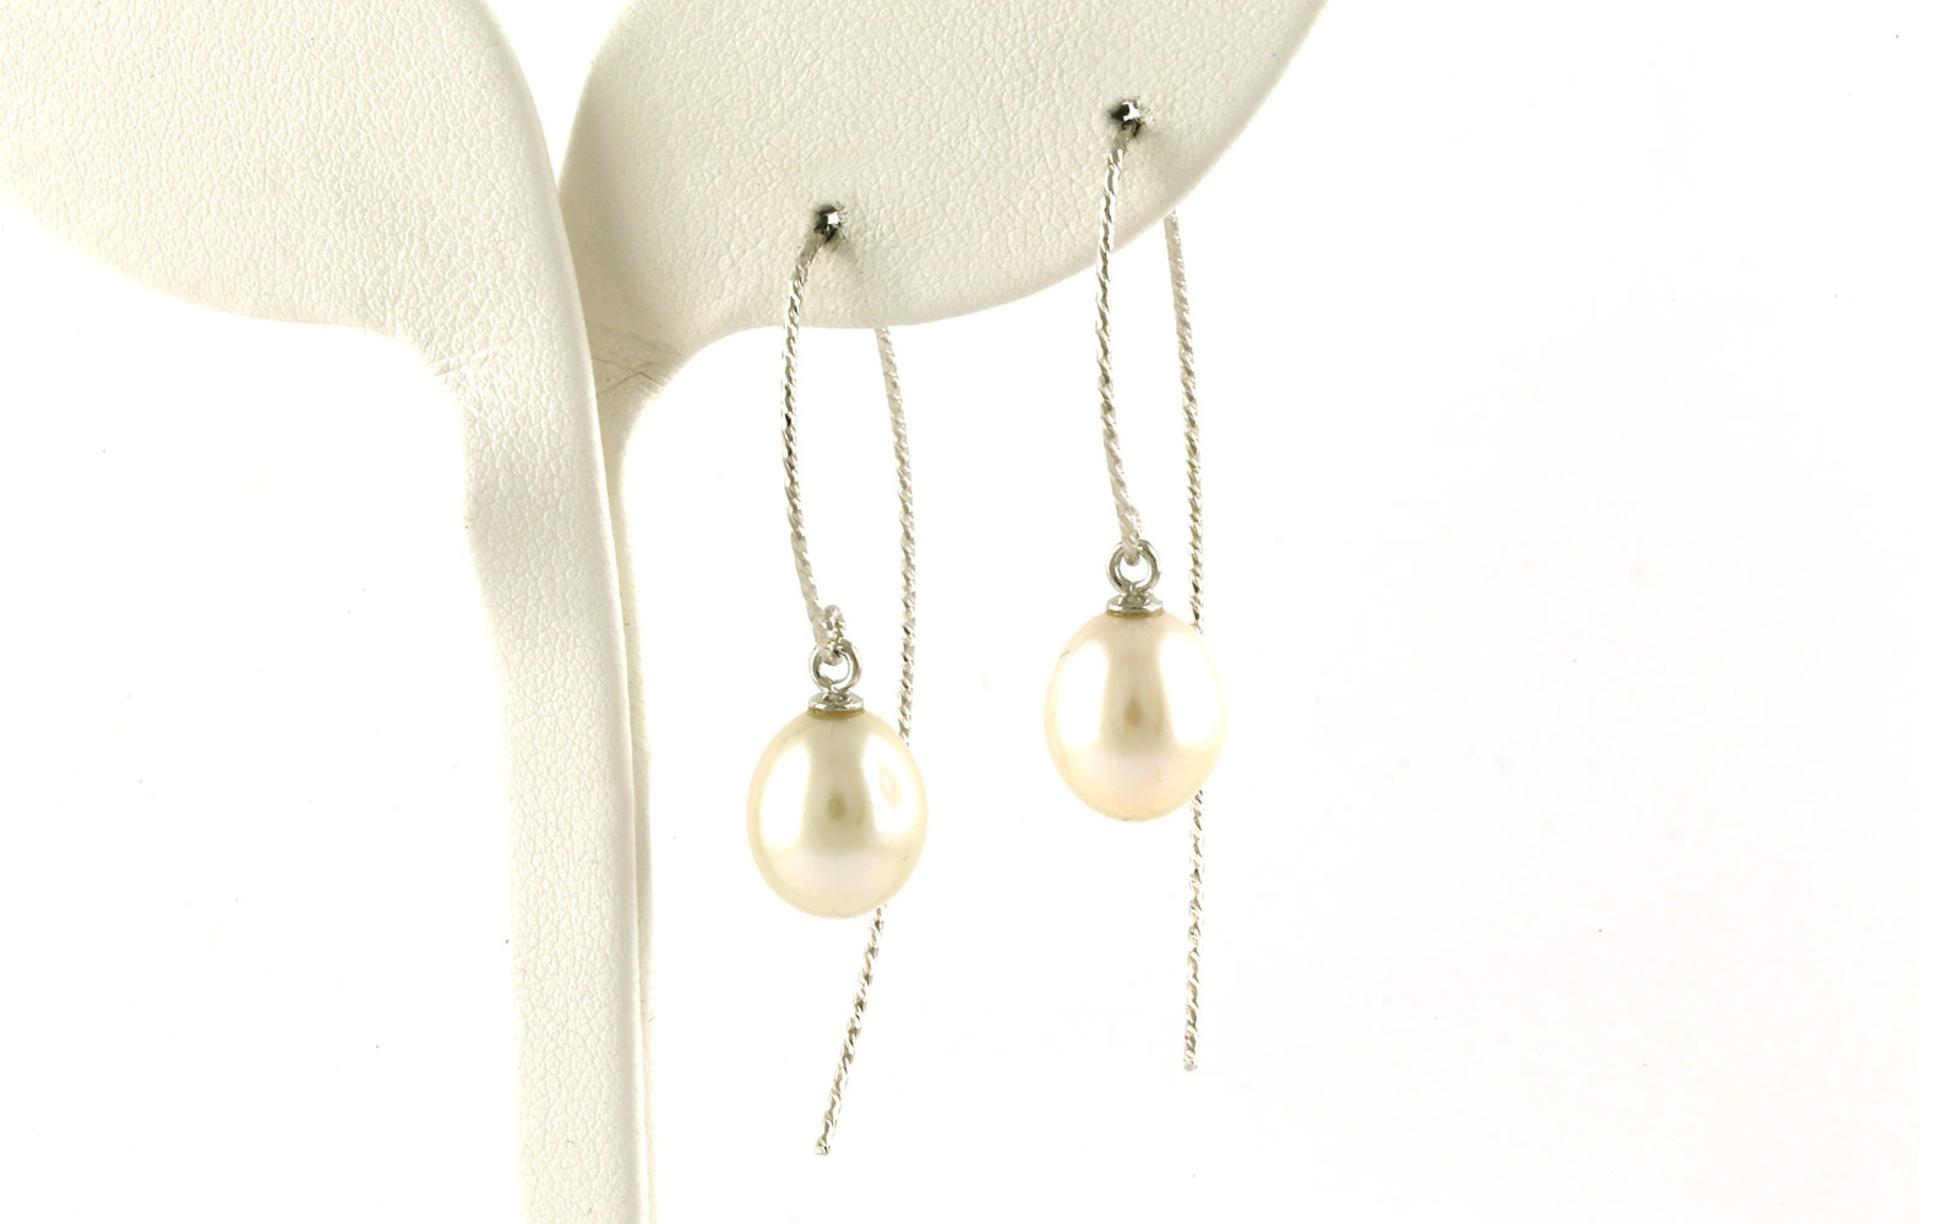 Sweep-style Pearl Dangle Earrings with Sparkle Finish in Sterling Silver